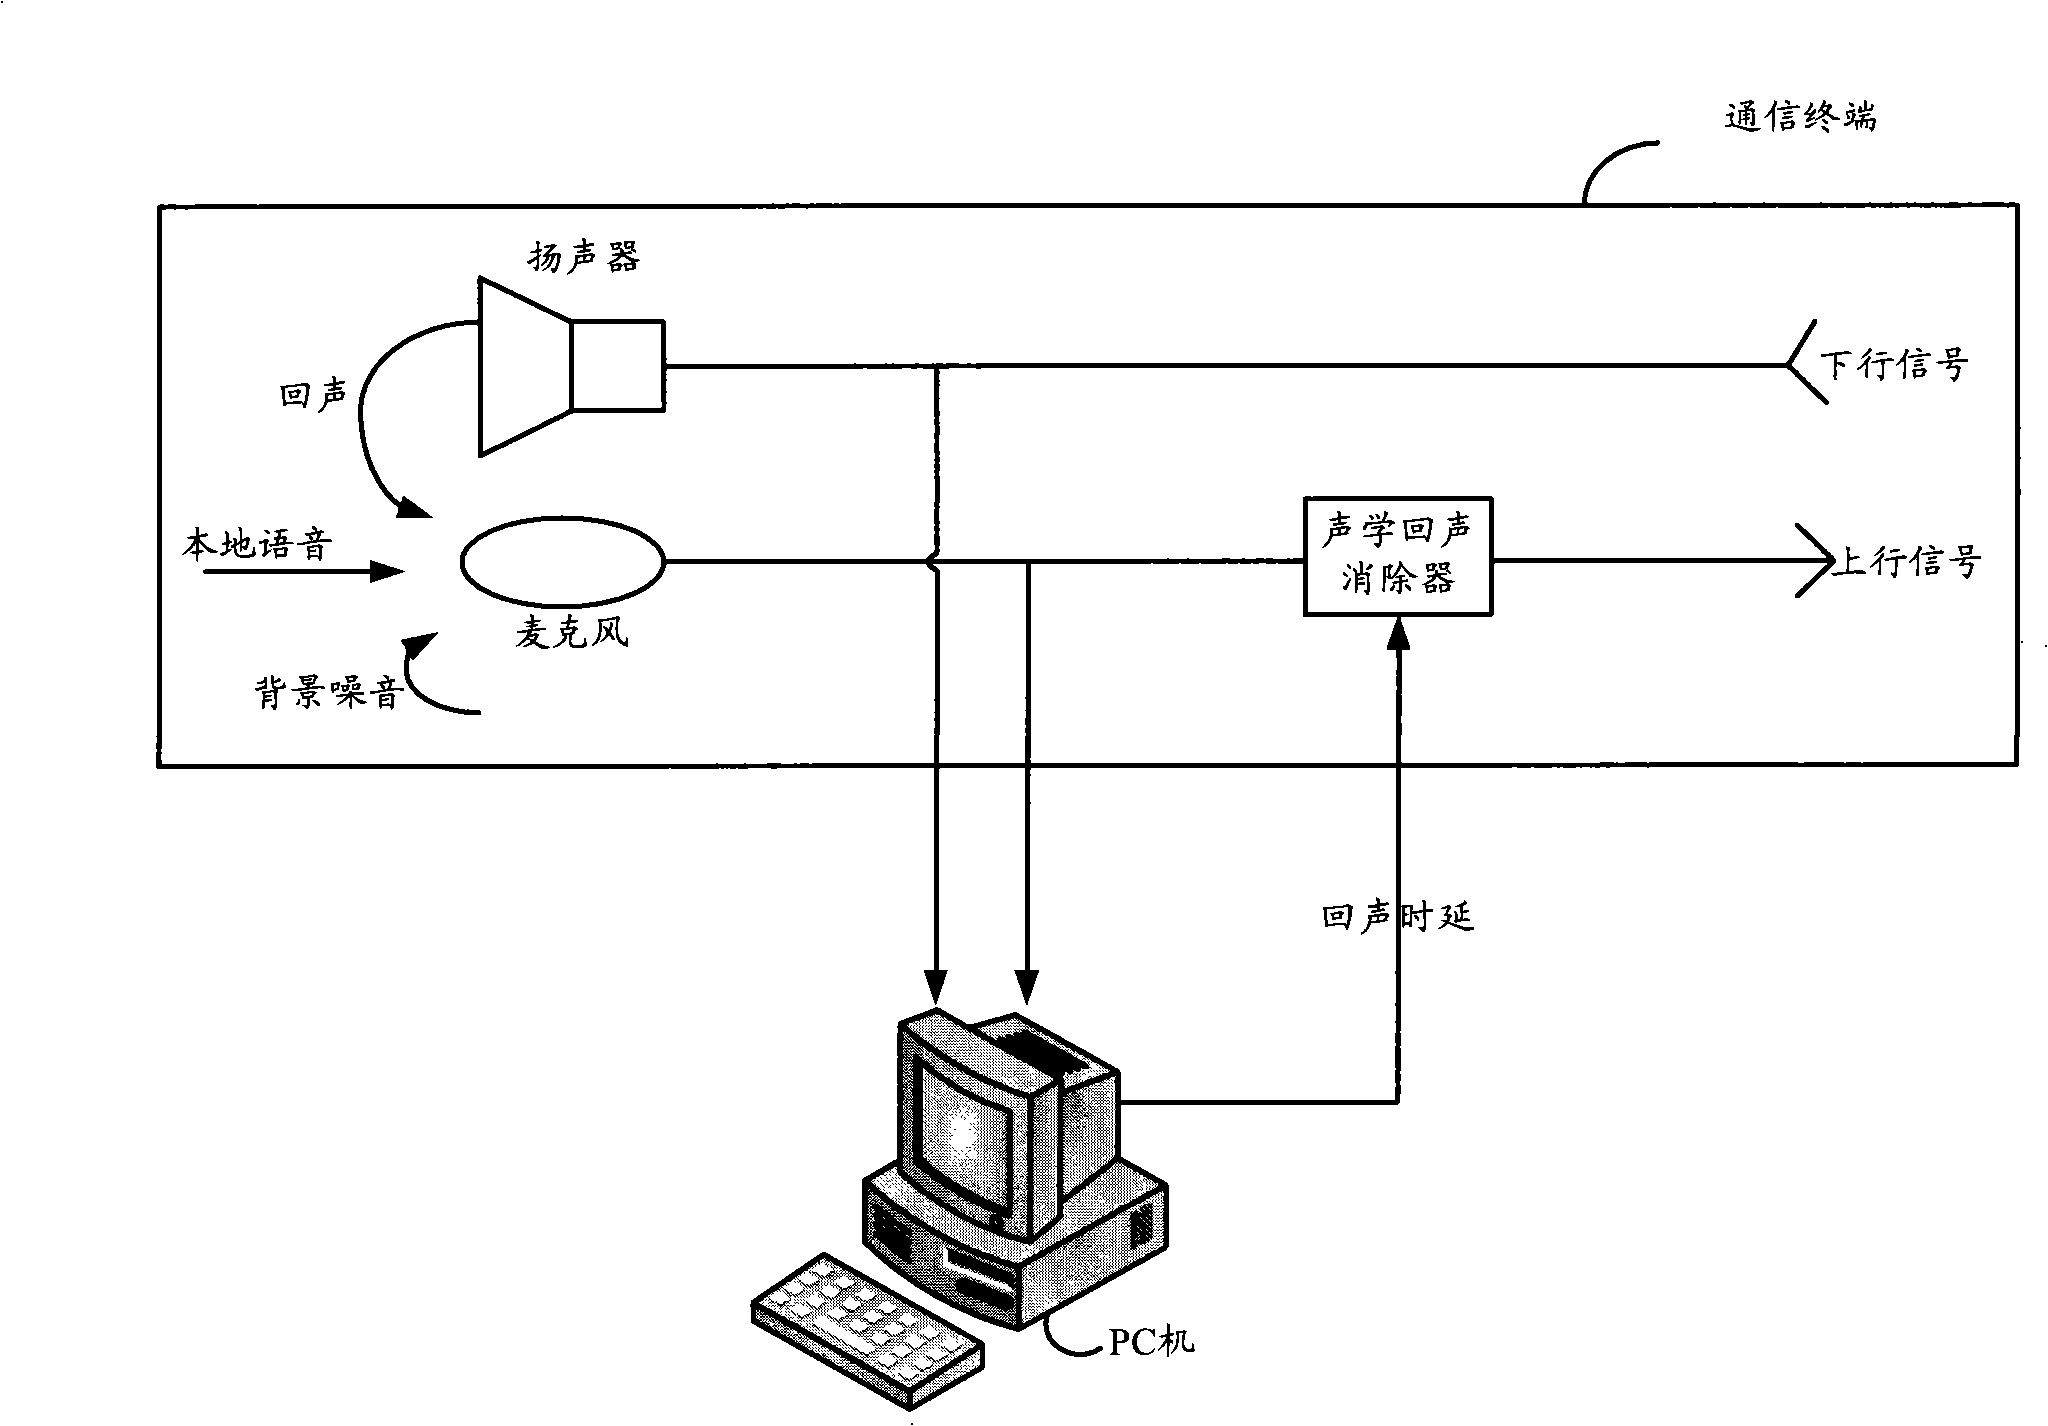 Echo elimination device, communication terminal and method for confirming echo delay time